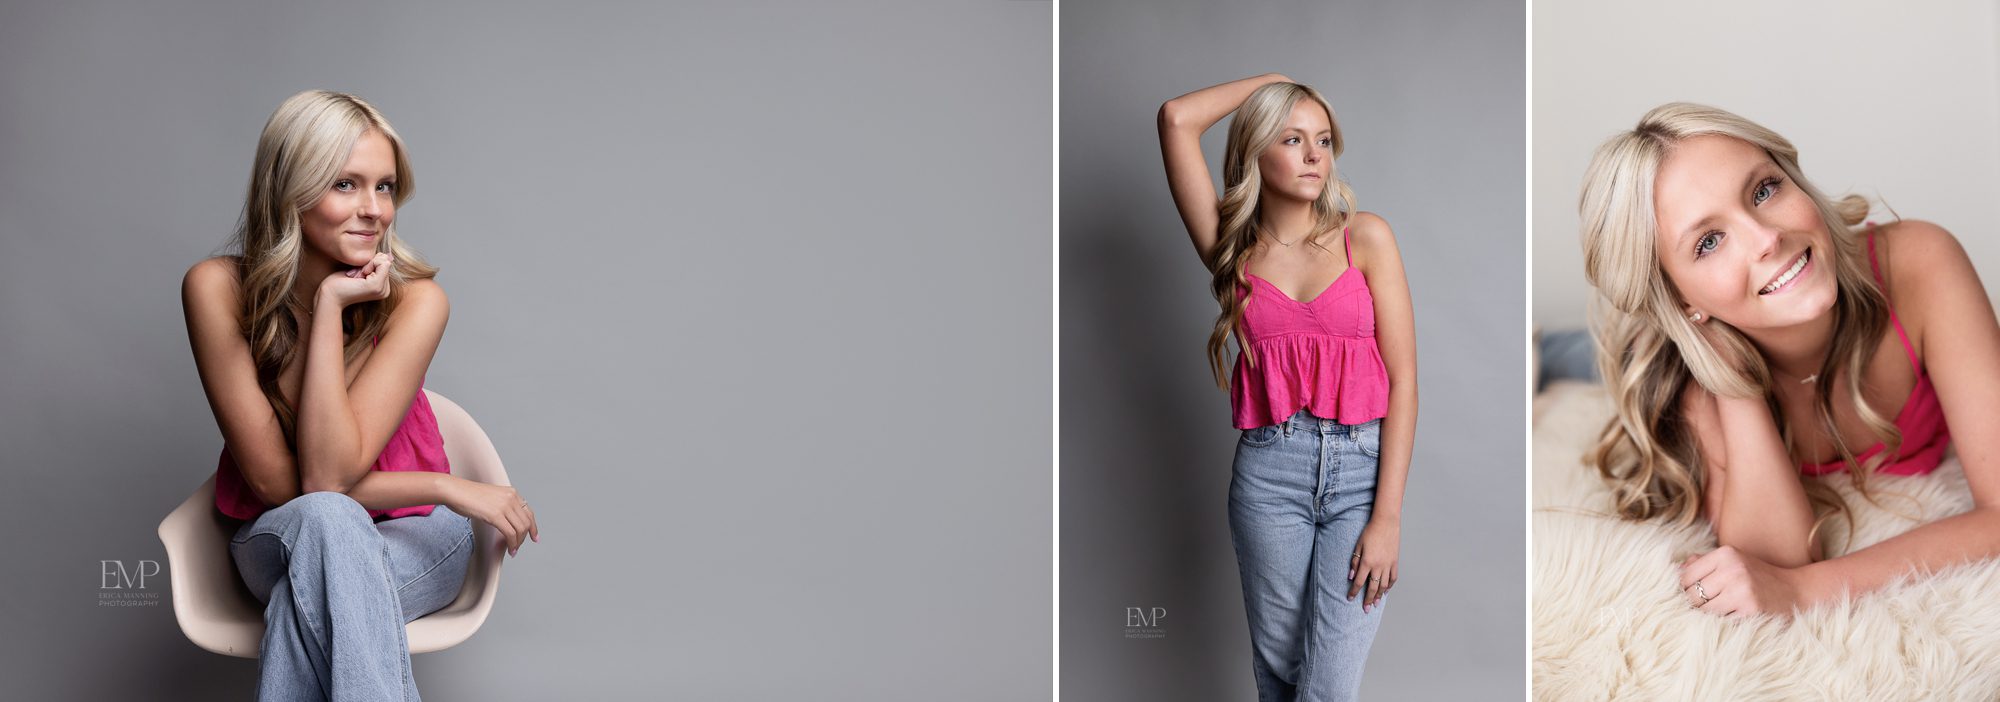 High school senior girl in pink top and blue jeans studio photos